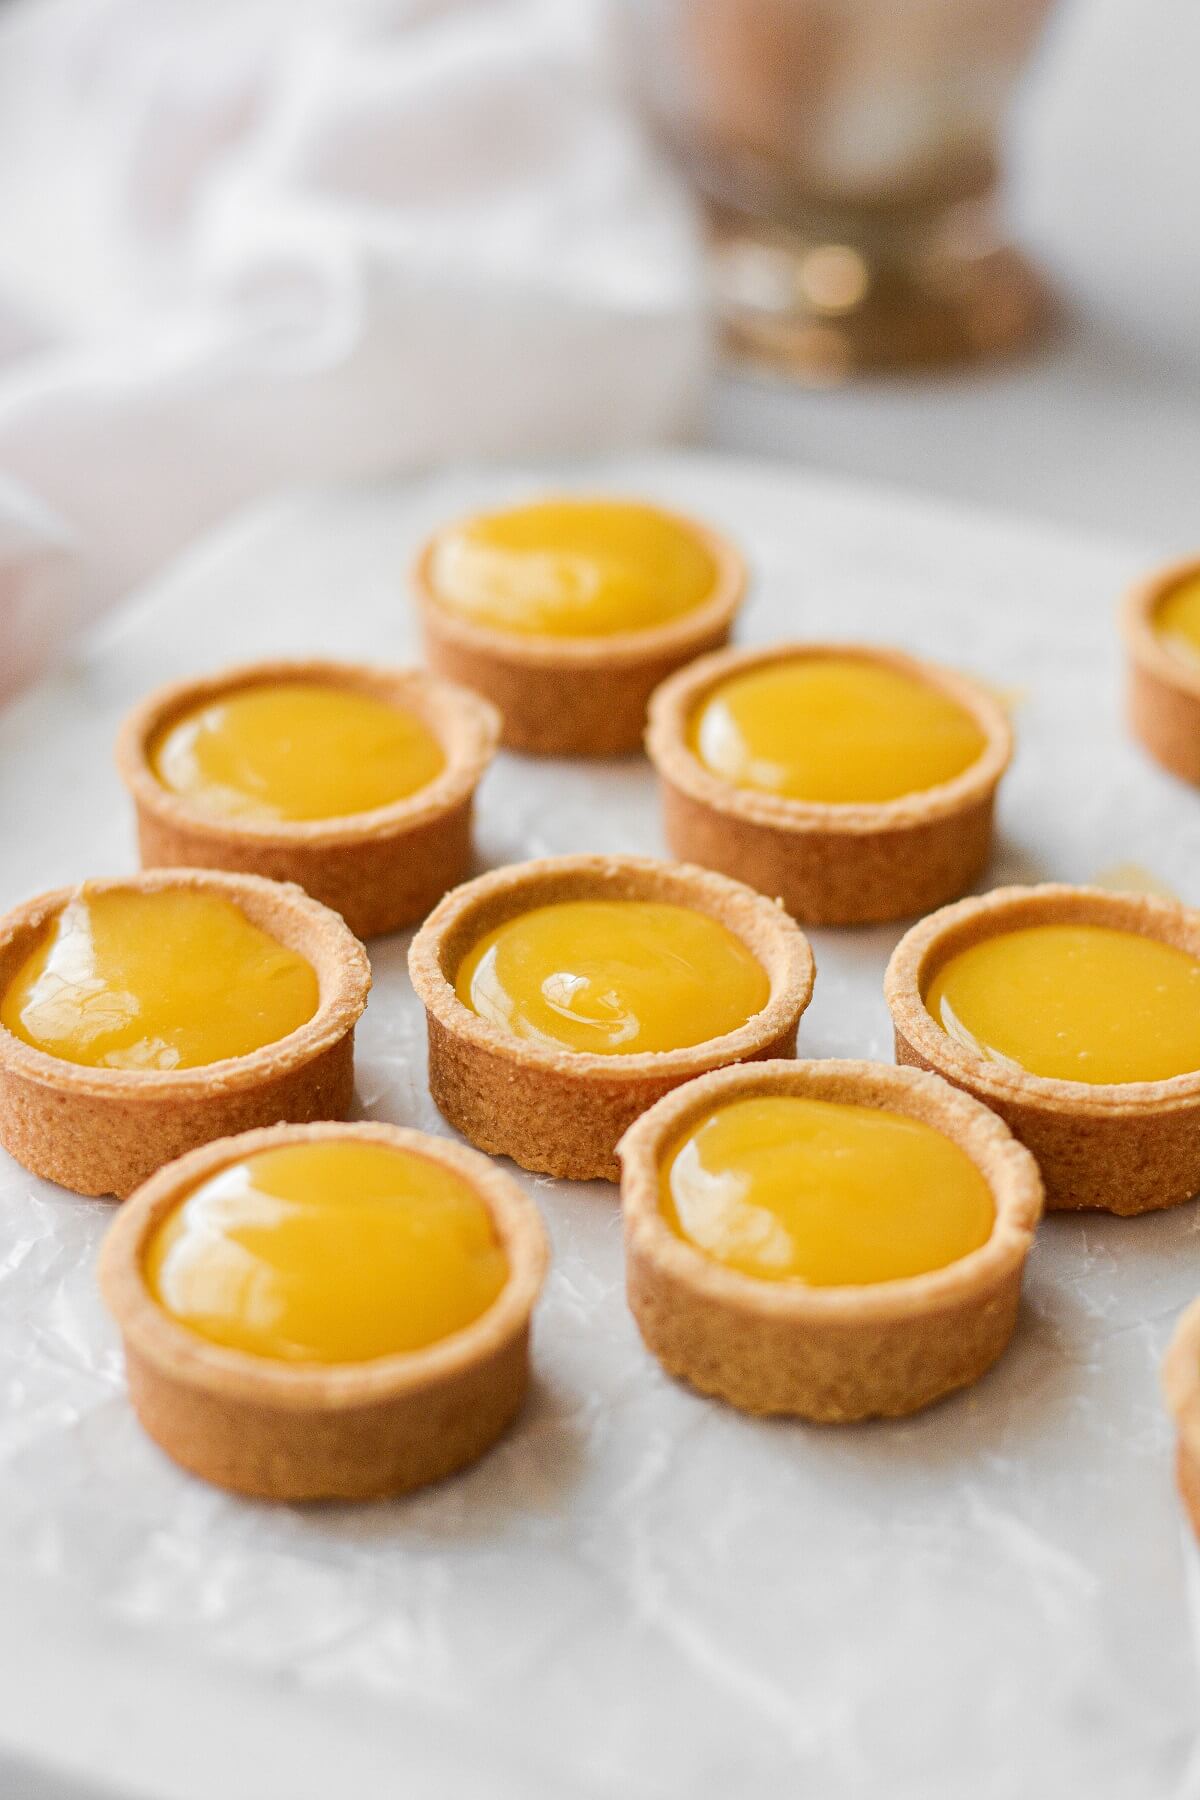 Mini pastry shells filled with homemade lemon curd.